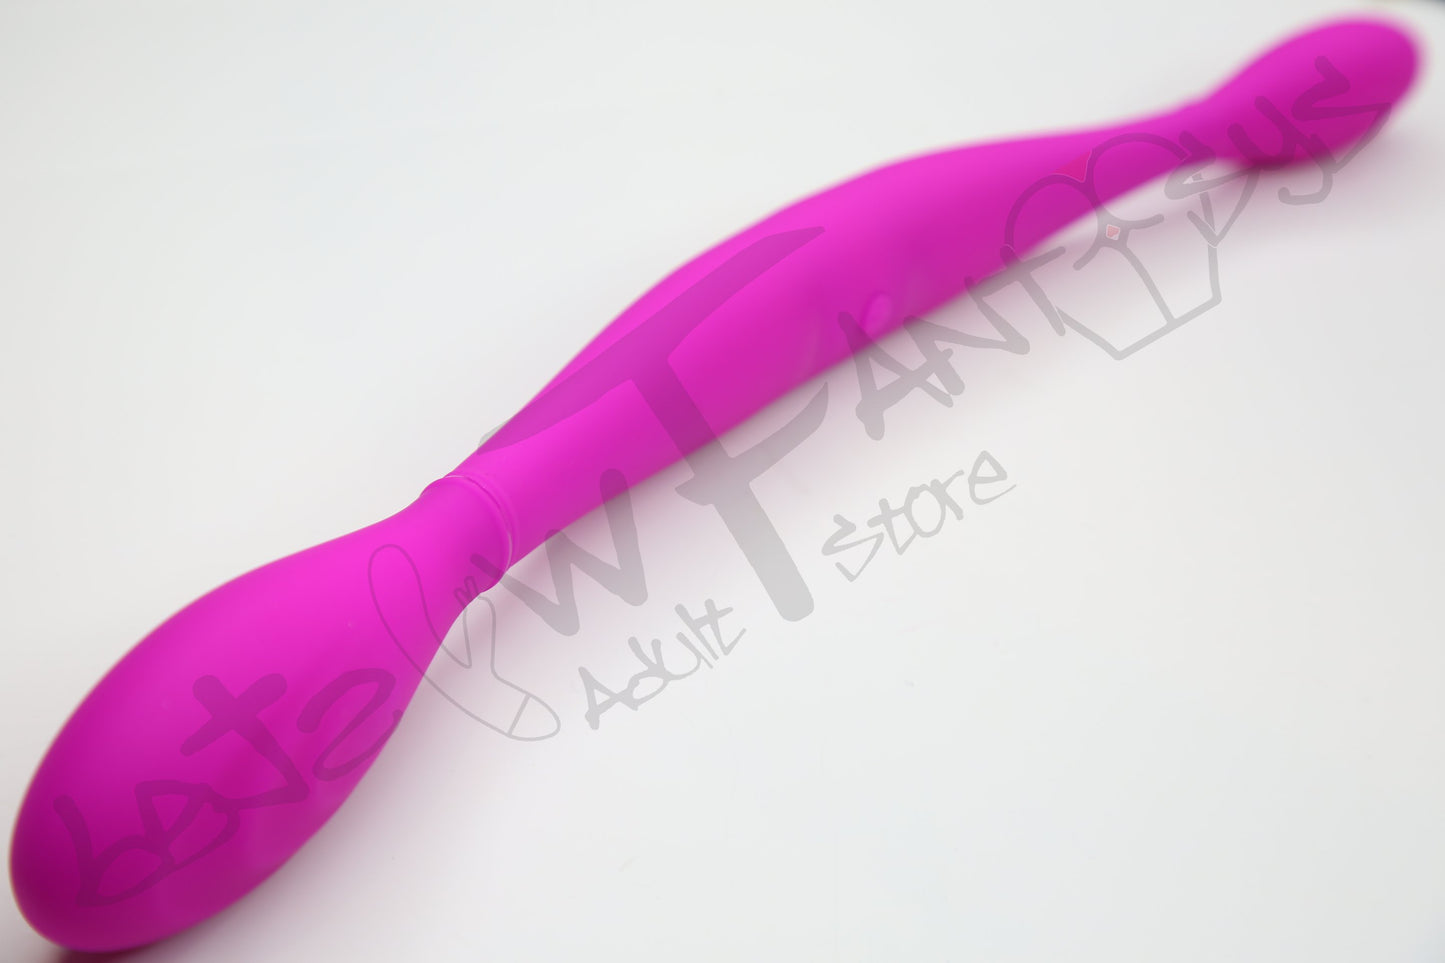 Double ended vibrator